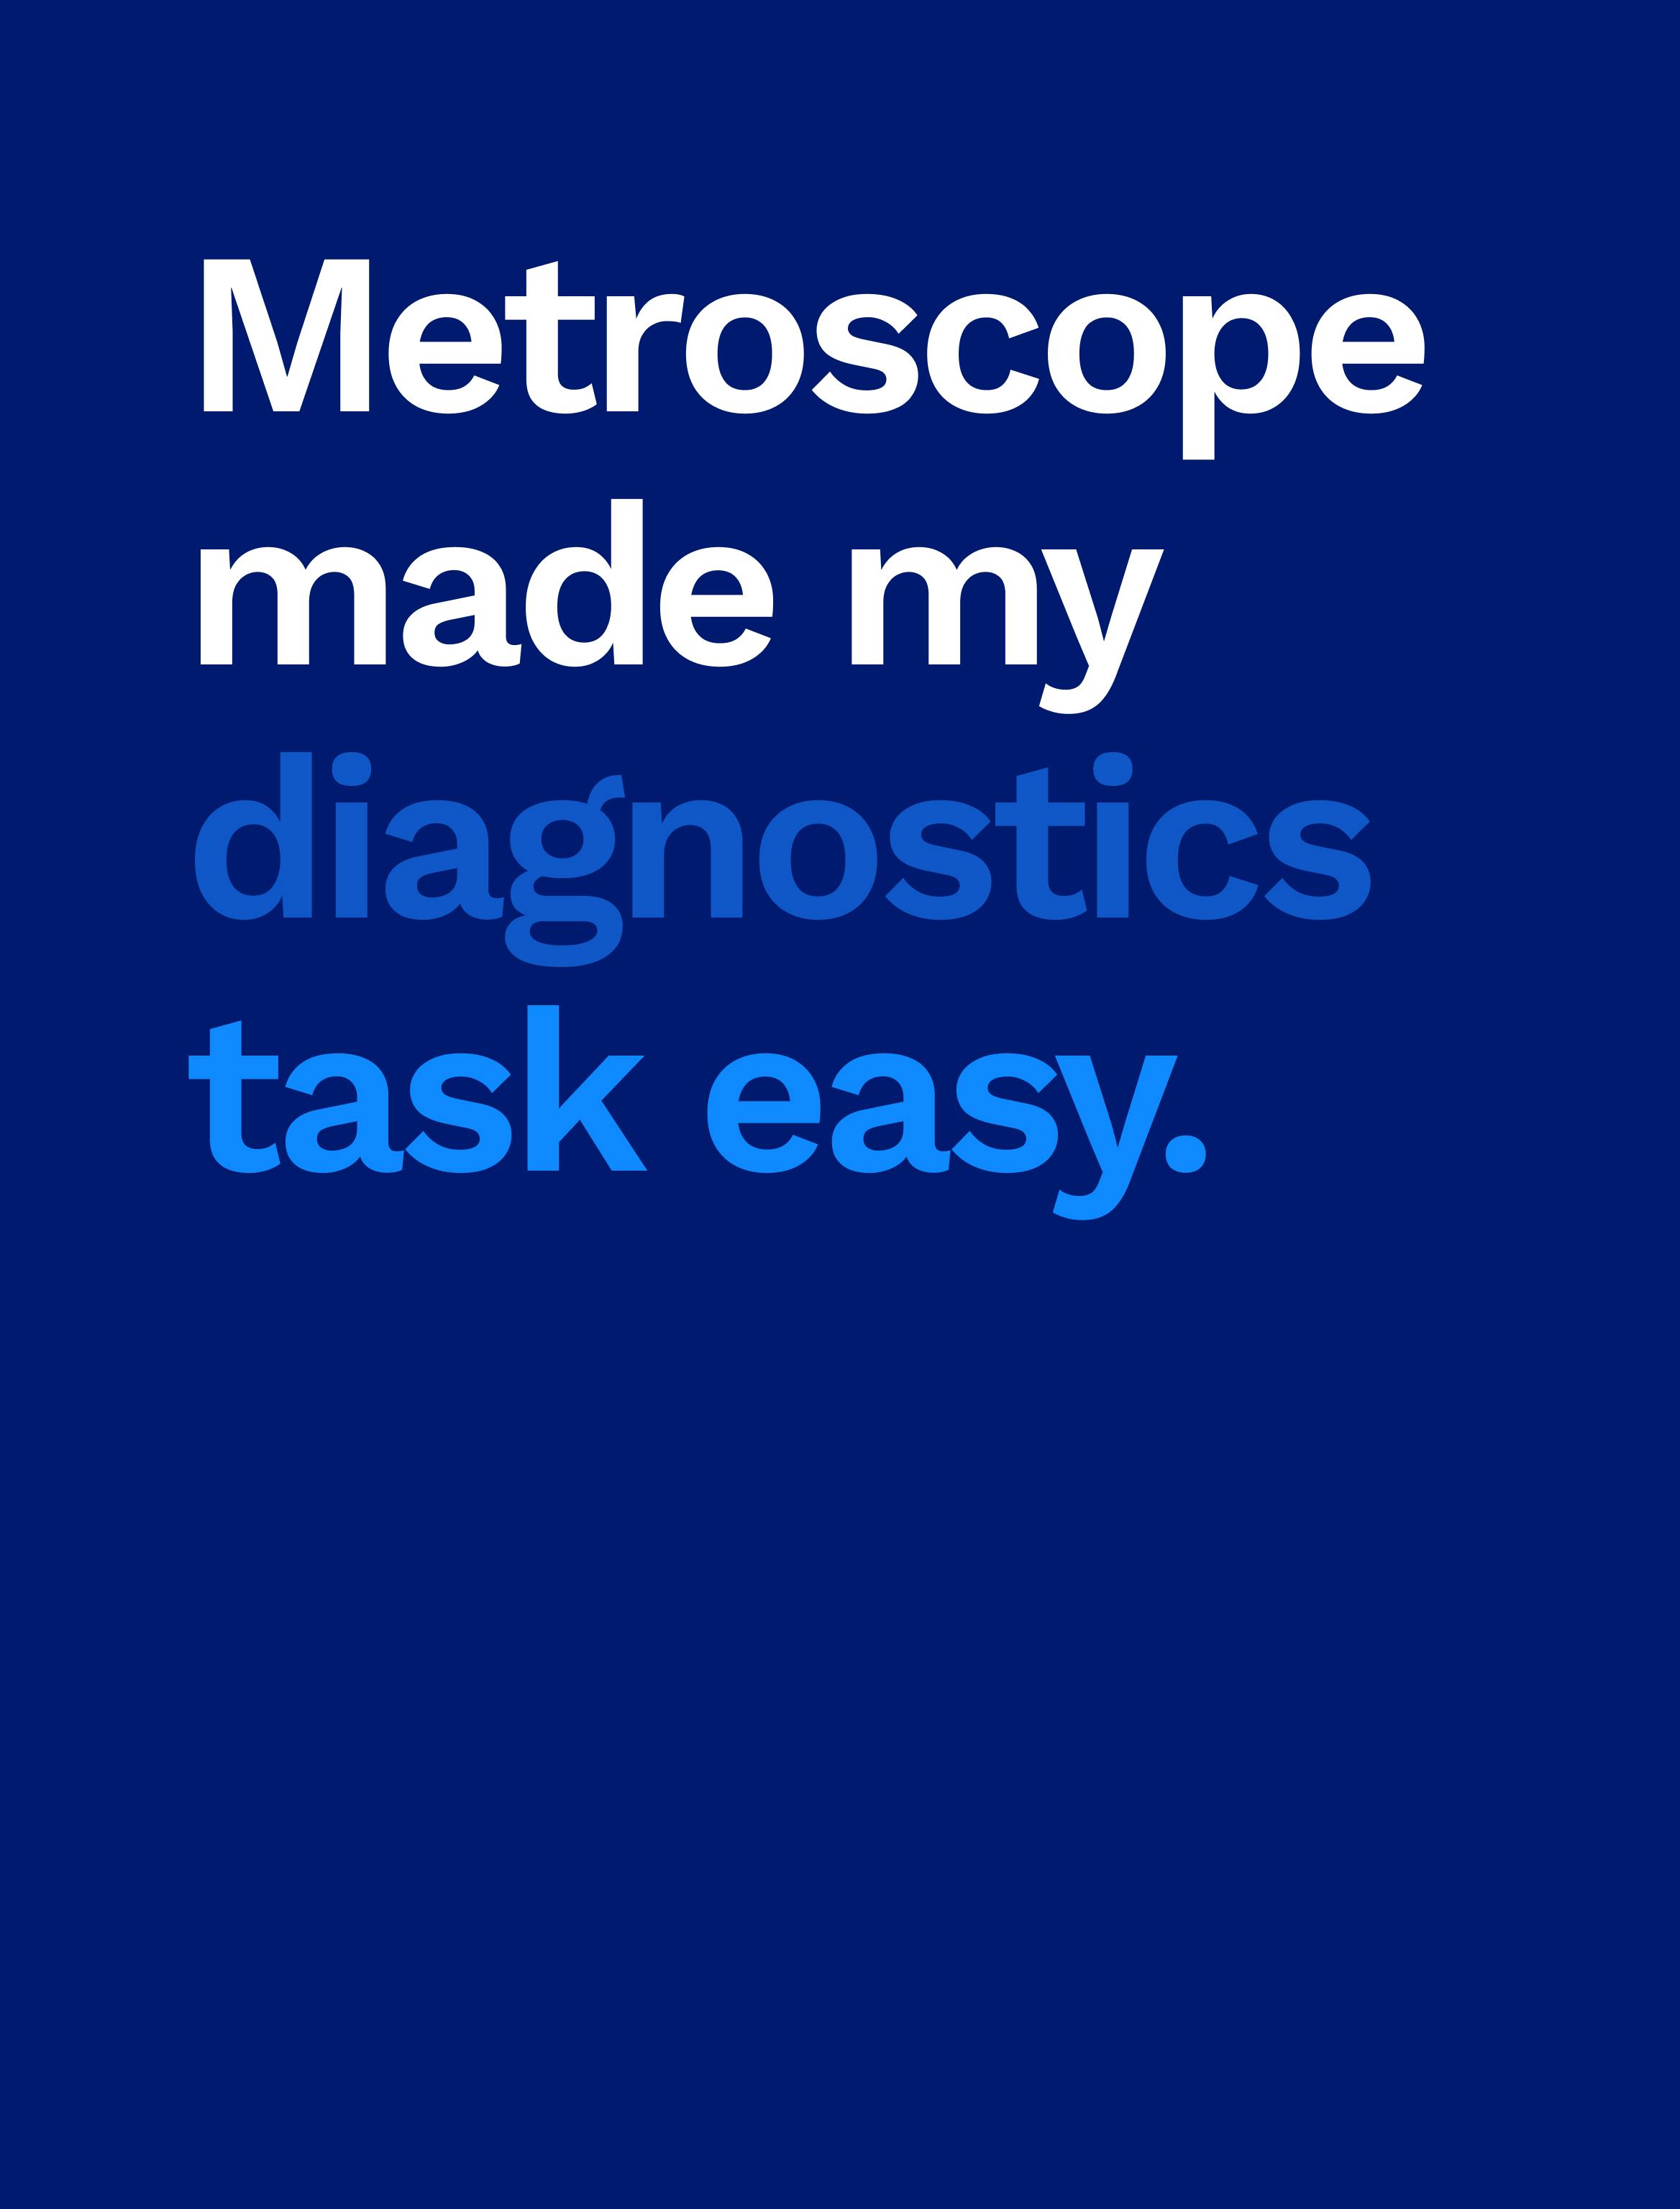 Metroscope quote on blue background